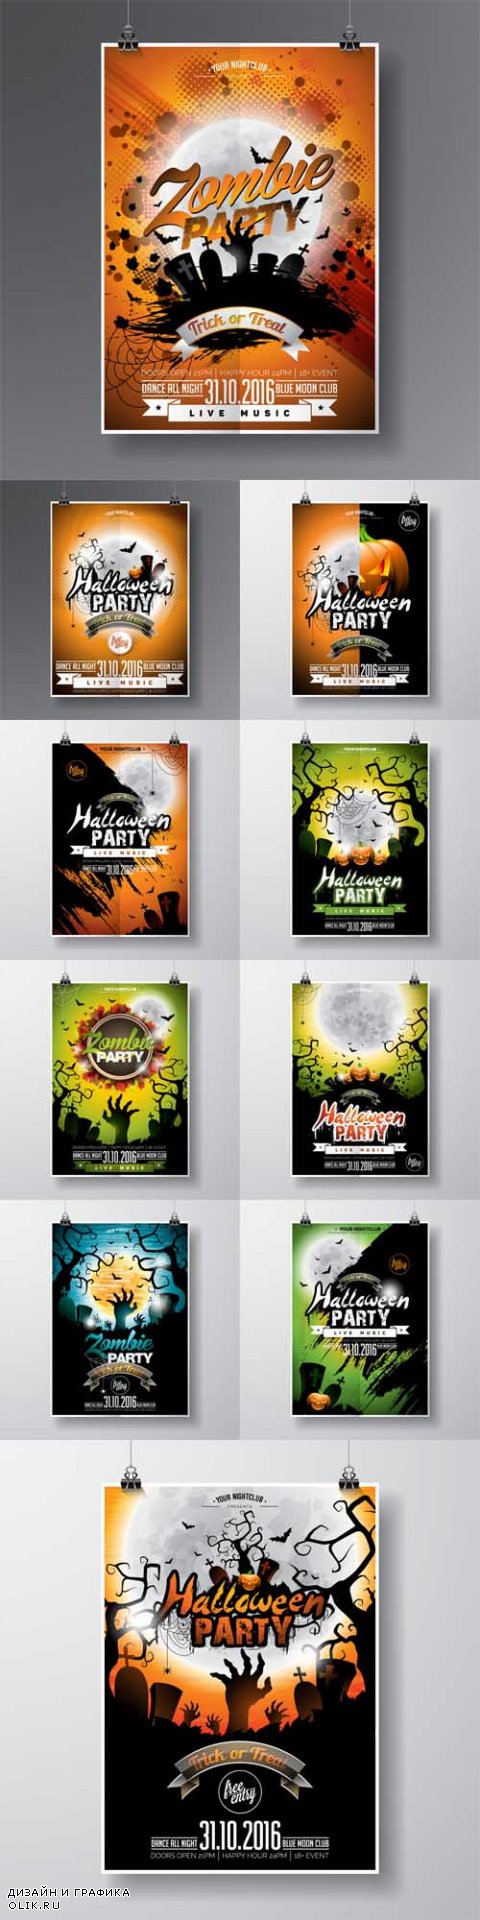 Vector Halloween Party Flyer Design with Typographic Elements and Pumpkin